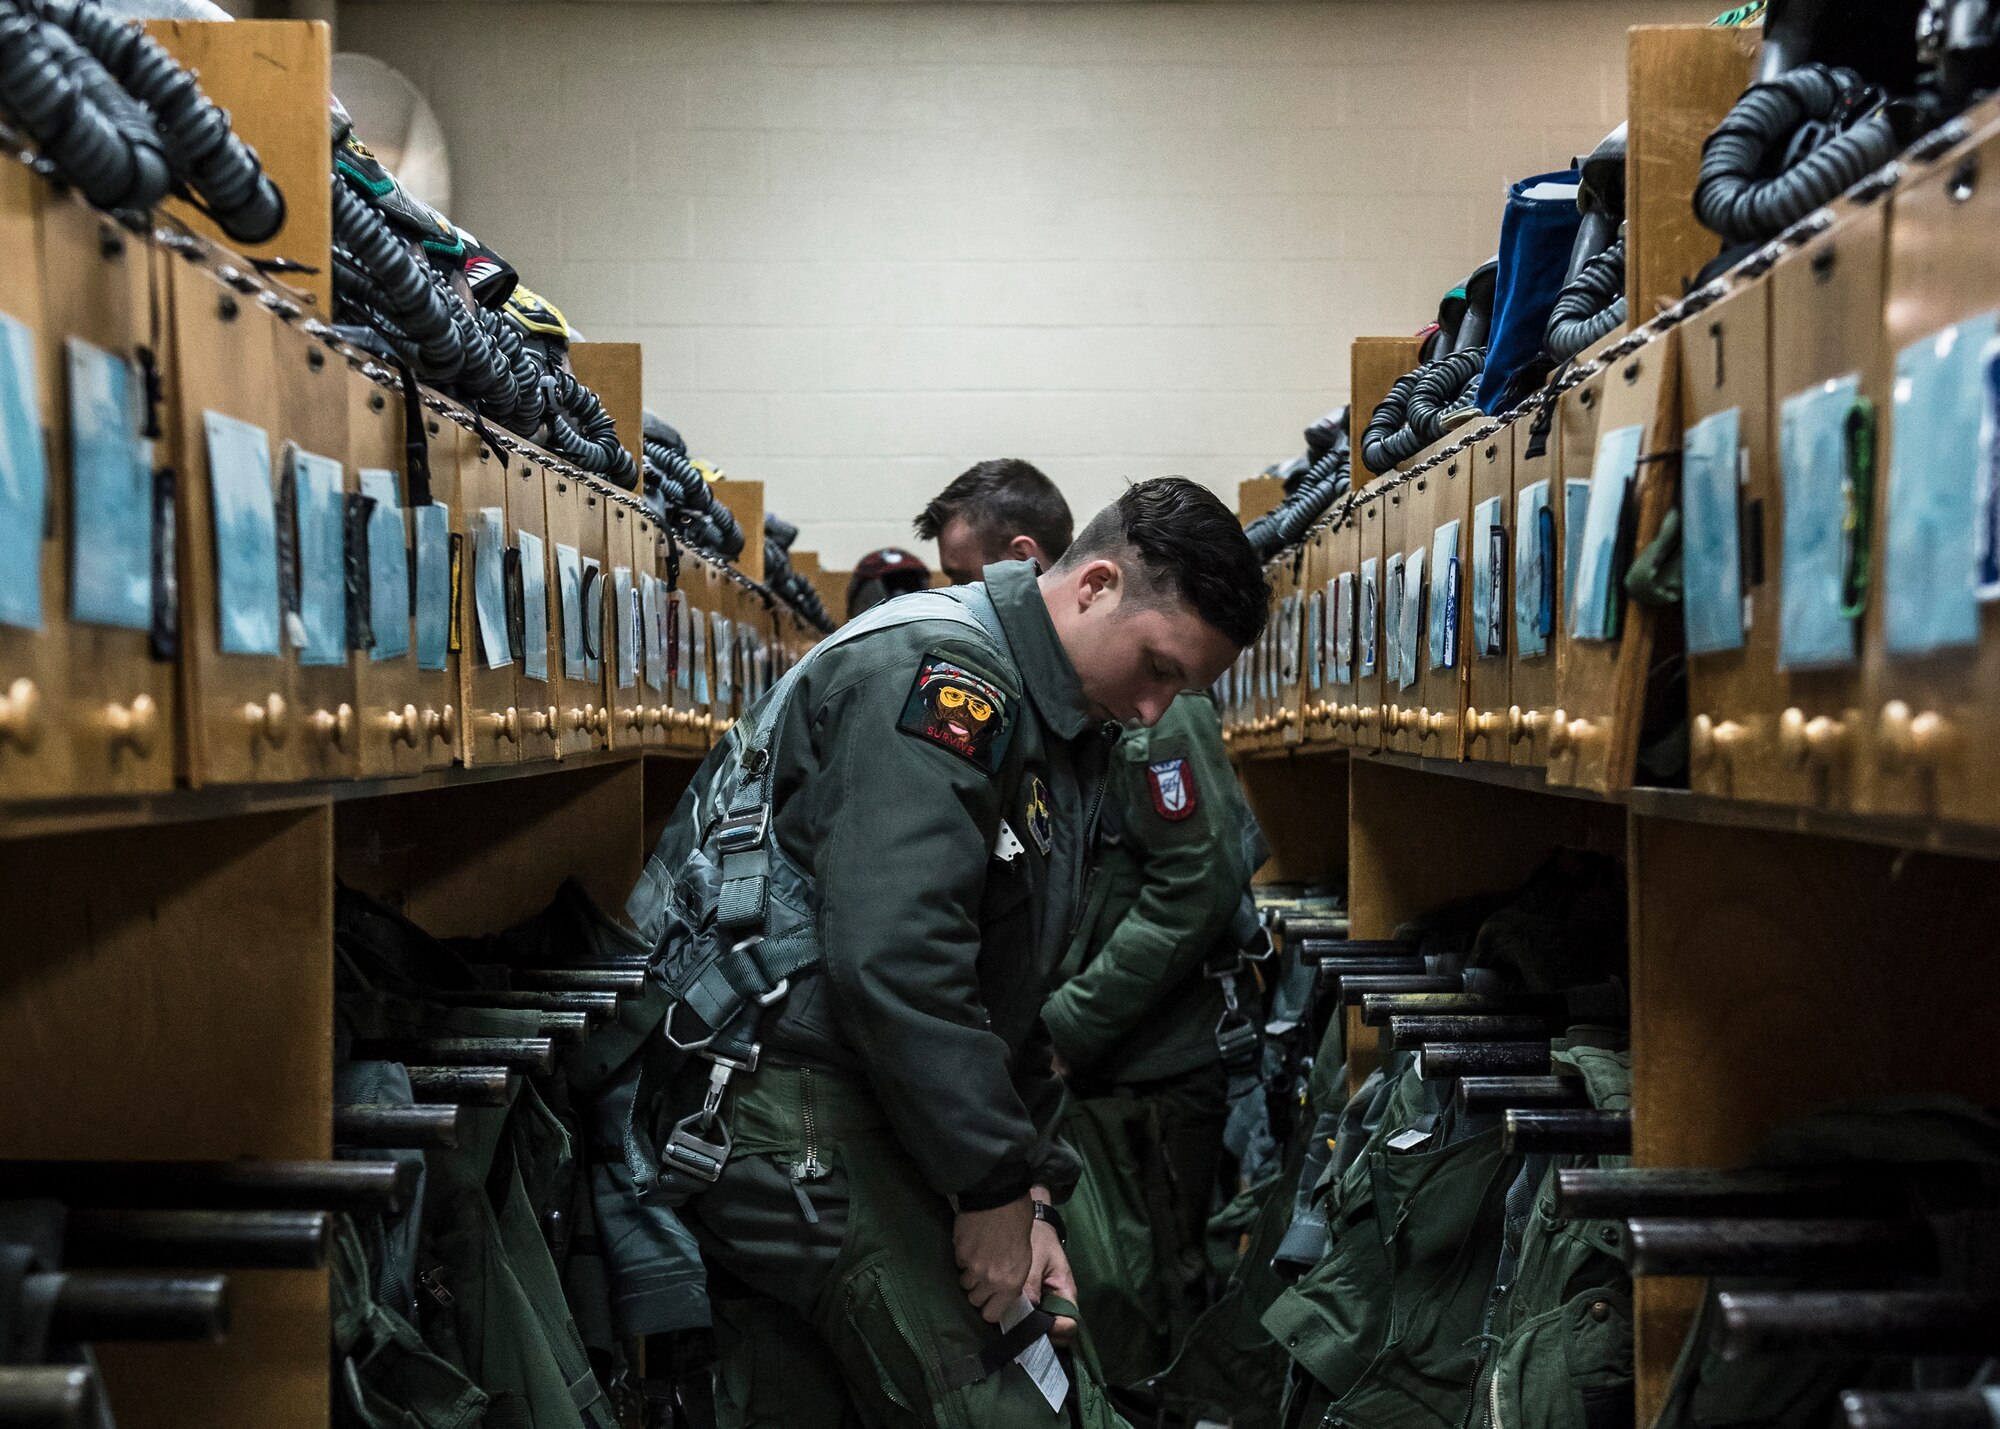 Euro-NATO Joint Jet Pilot Training Program student pilots gear up at Sheppard Air Force Base, Texas, Dec. 10, 2019. Sheppard has pilots training almost 24/7 around the clock. Pilots either have mandatory flying times or could voluntarily sign up for extra training. With so many planes coming in and out of Sheppard, pilots have a strict schedule of where and when to be, including a set amount of time to gear up and get out to their plane. (U.S. Air Force photo by Senior Airman Pedro Tenorio)